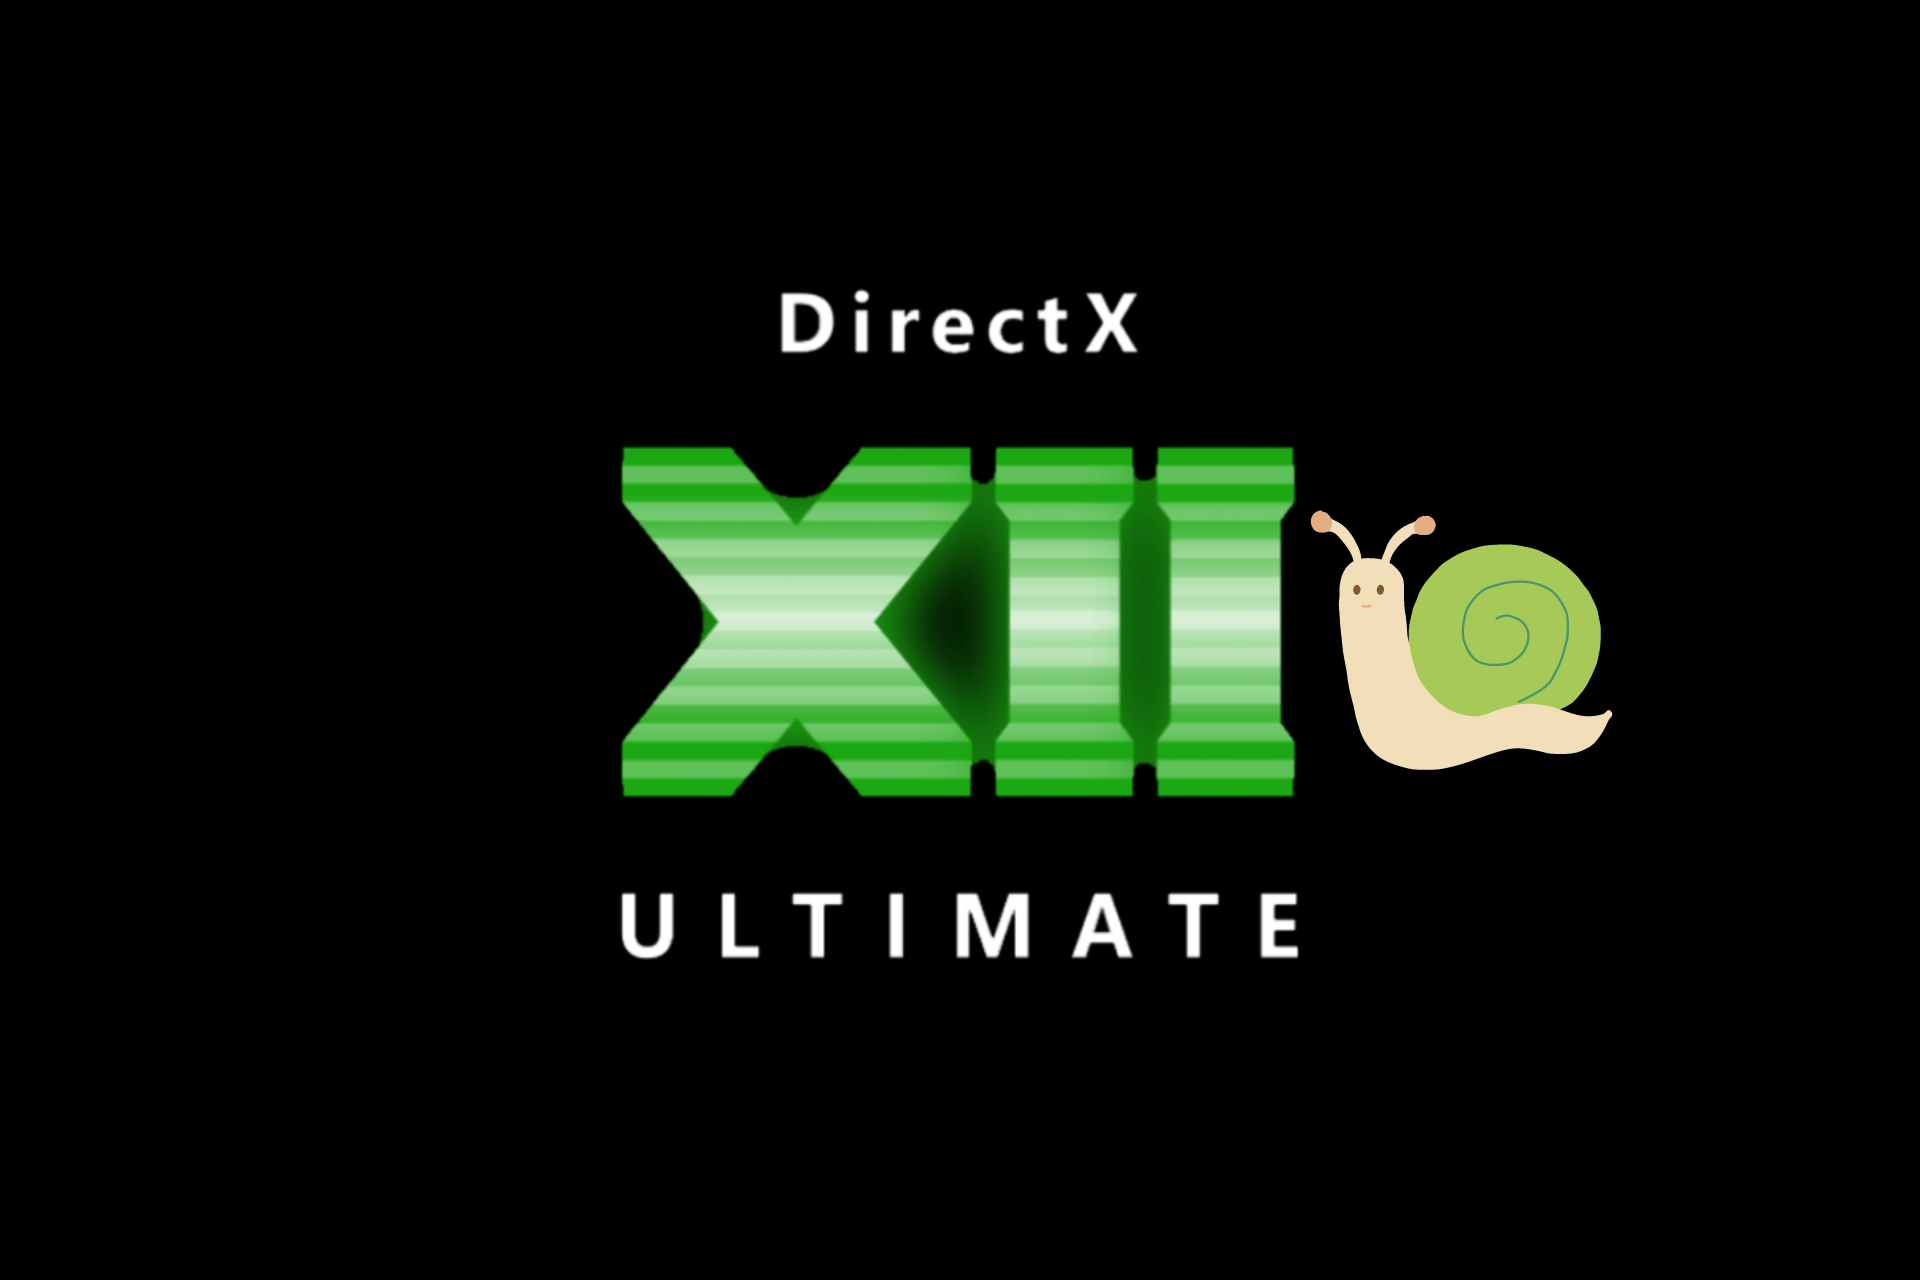 How to fix DirectX 12 if it's laggy